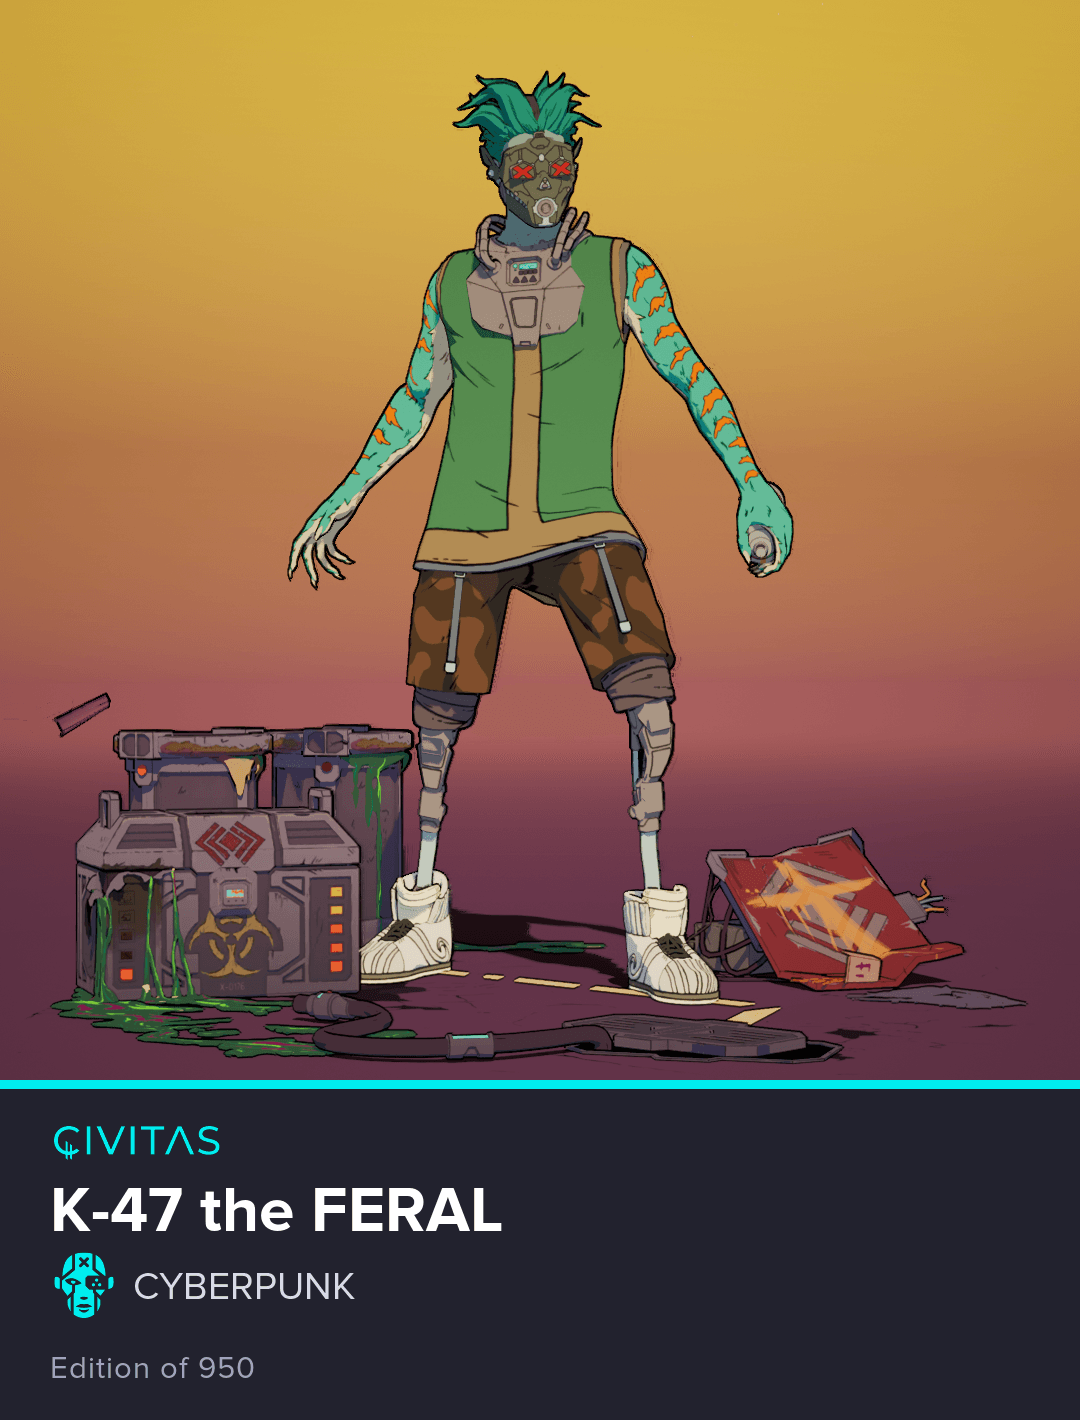 K-47 the Feral #332